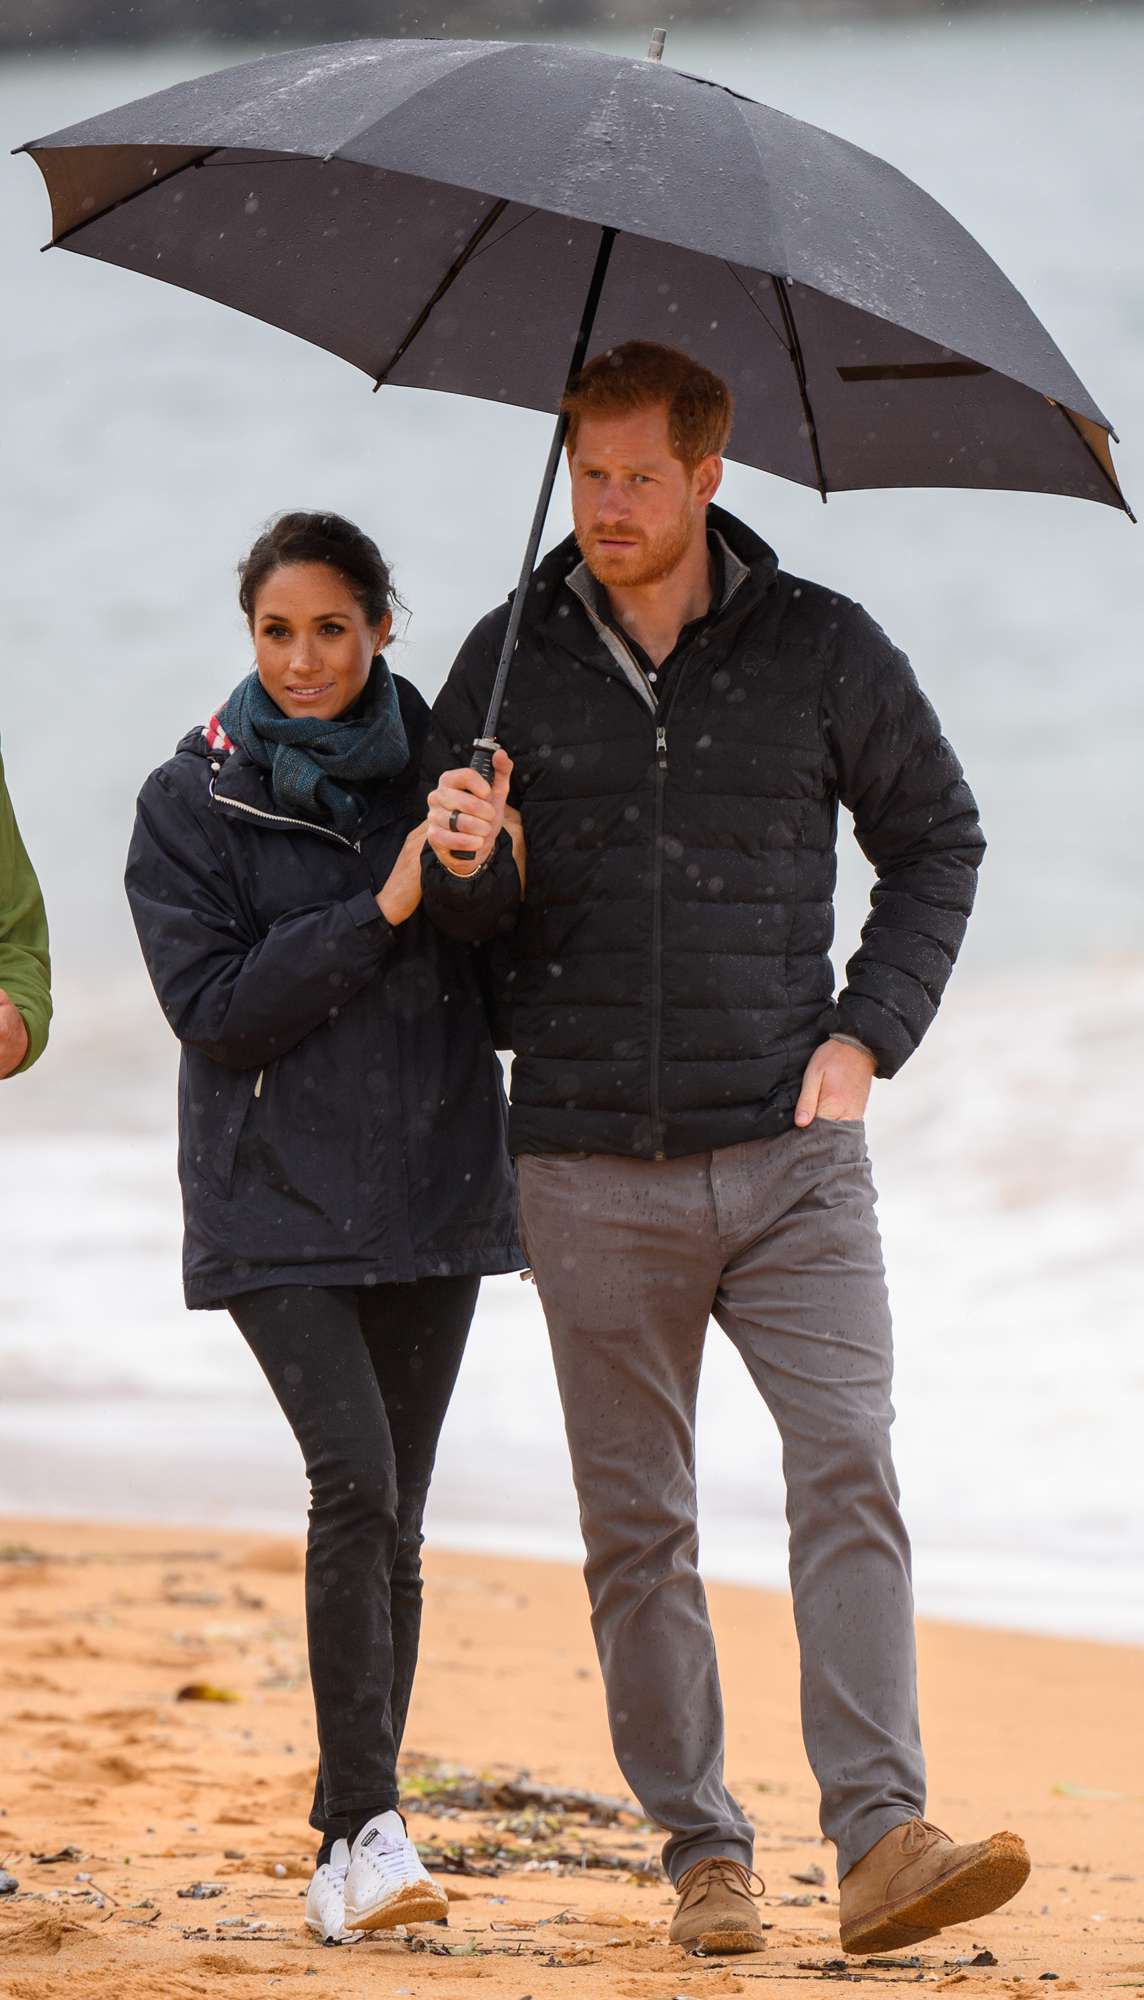 Prince Harry and Meghan Duchess of Sussex tour of New Zealand - 29 Oct 2018